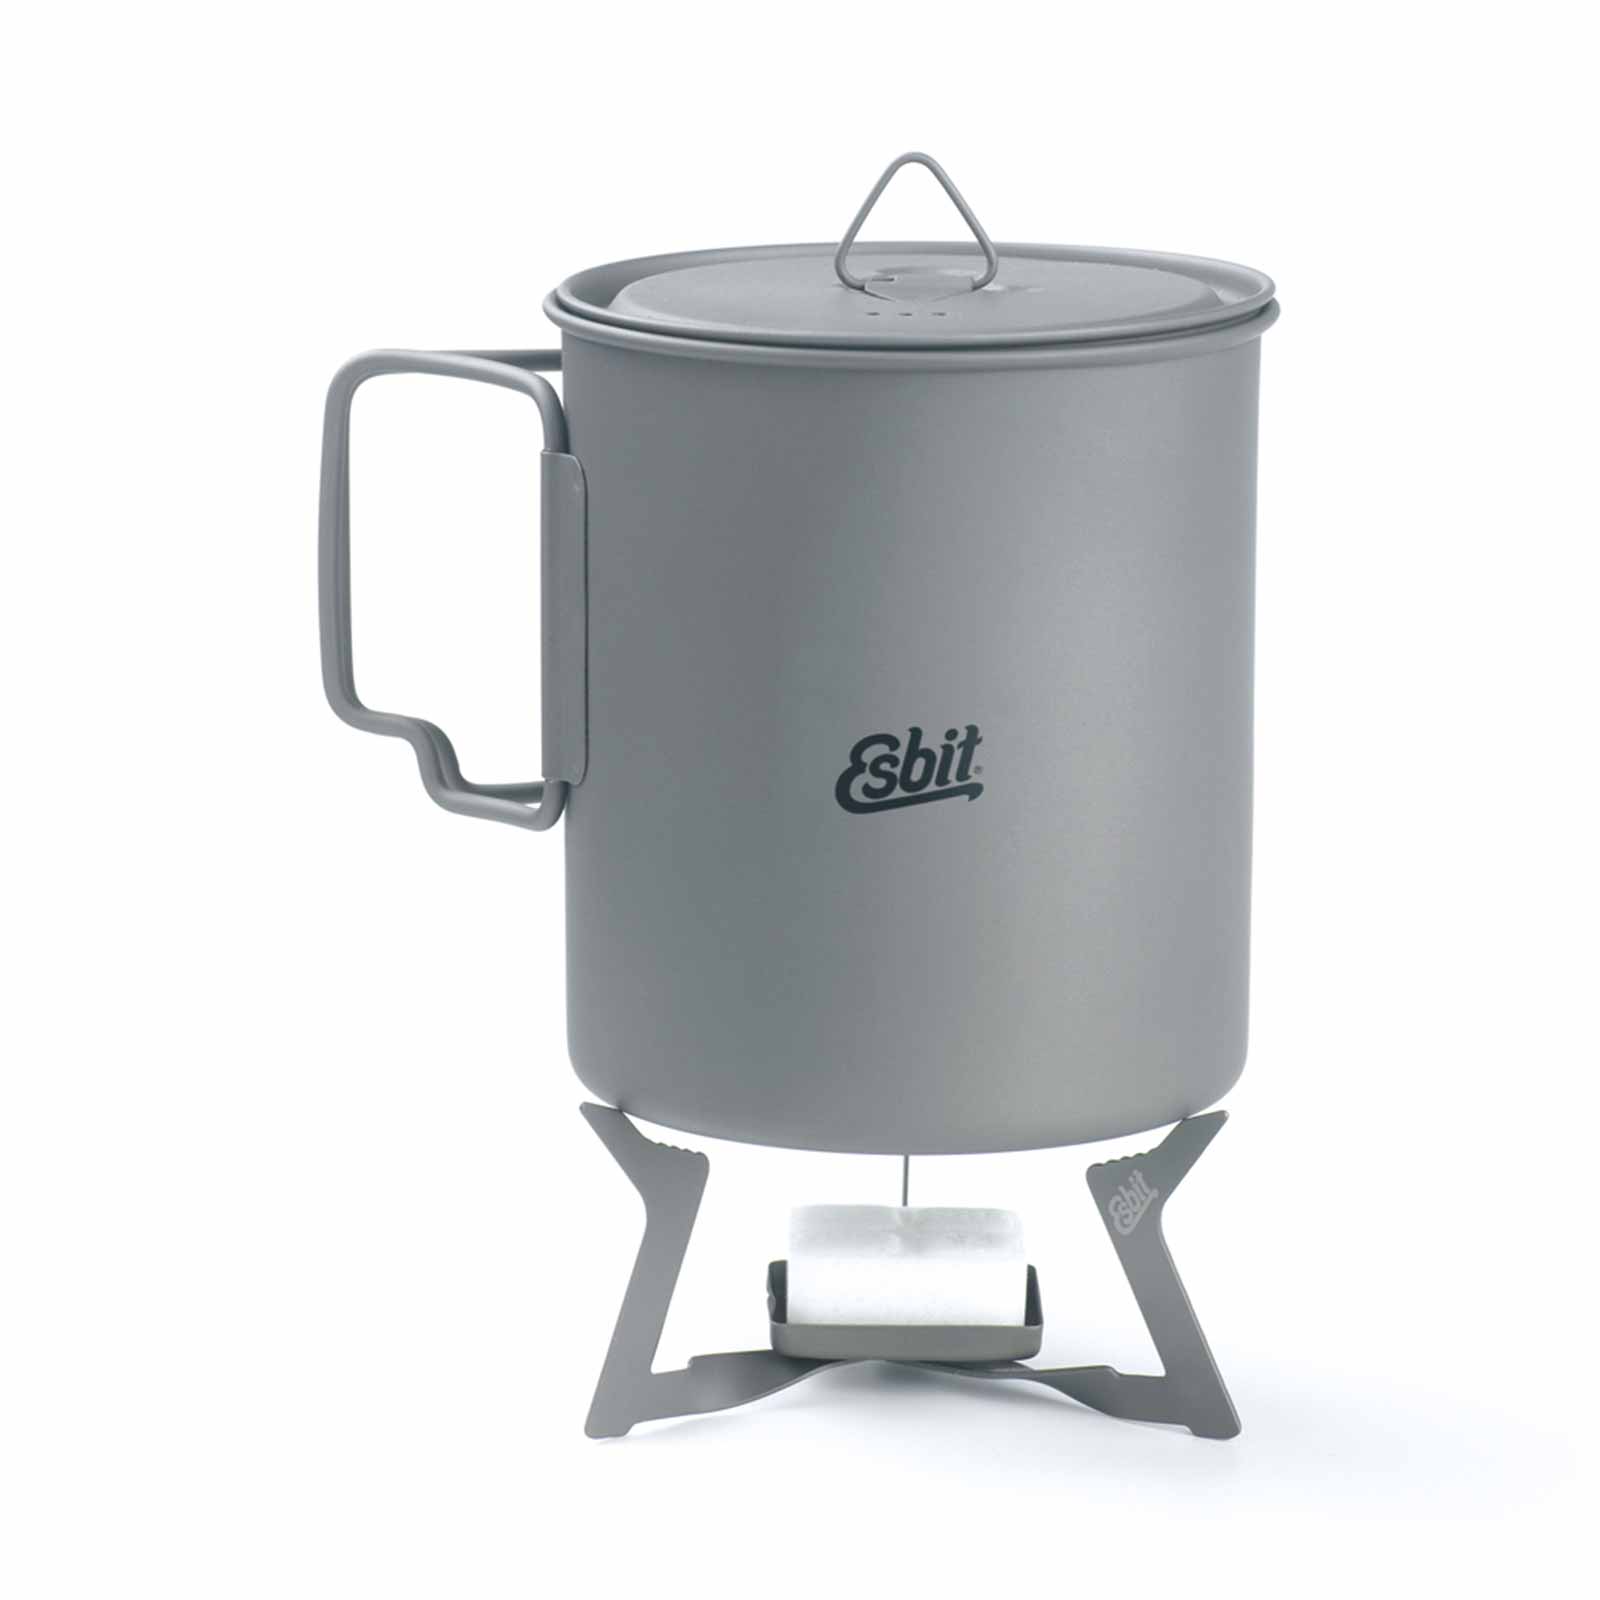 Esbit Stove made of Titanium · Foldable · Compact and Efficient